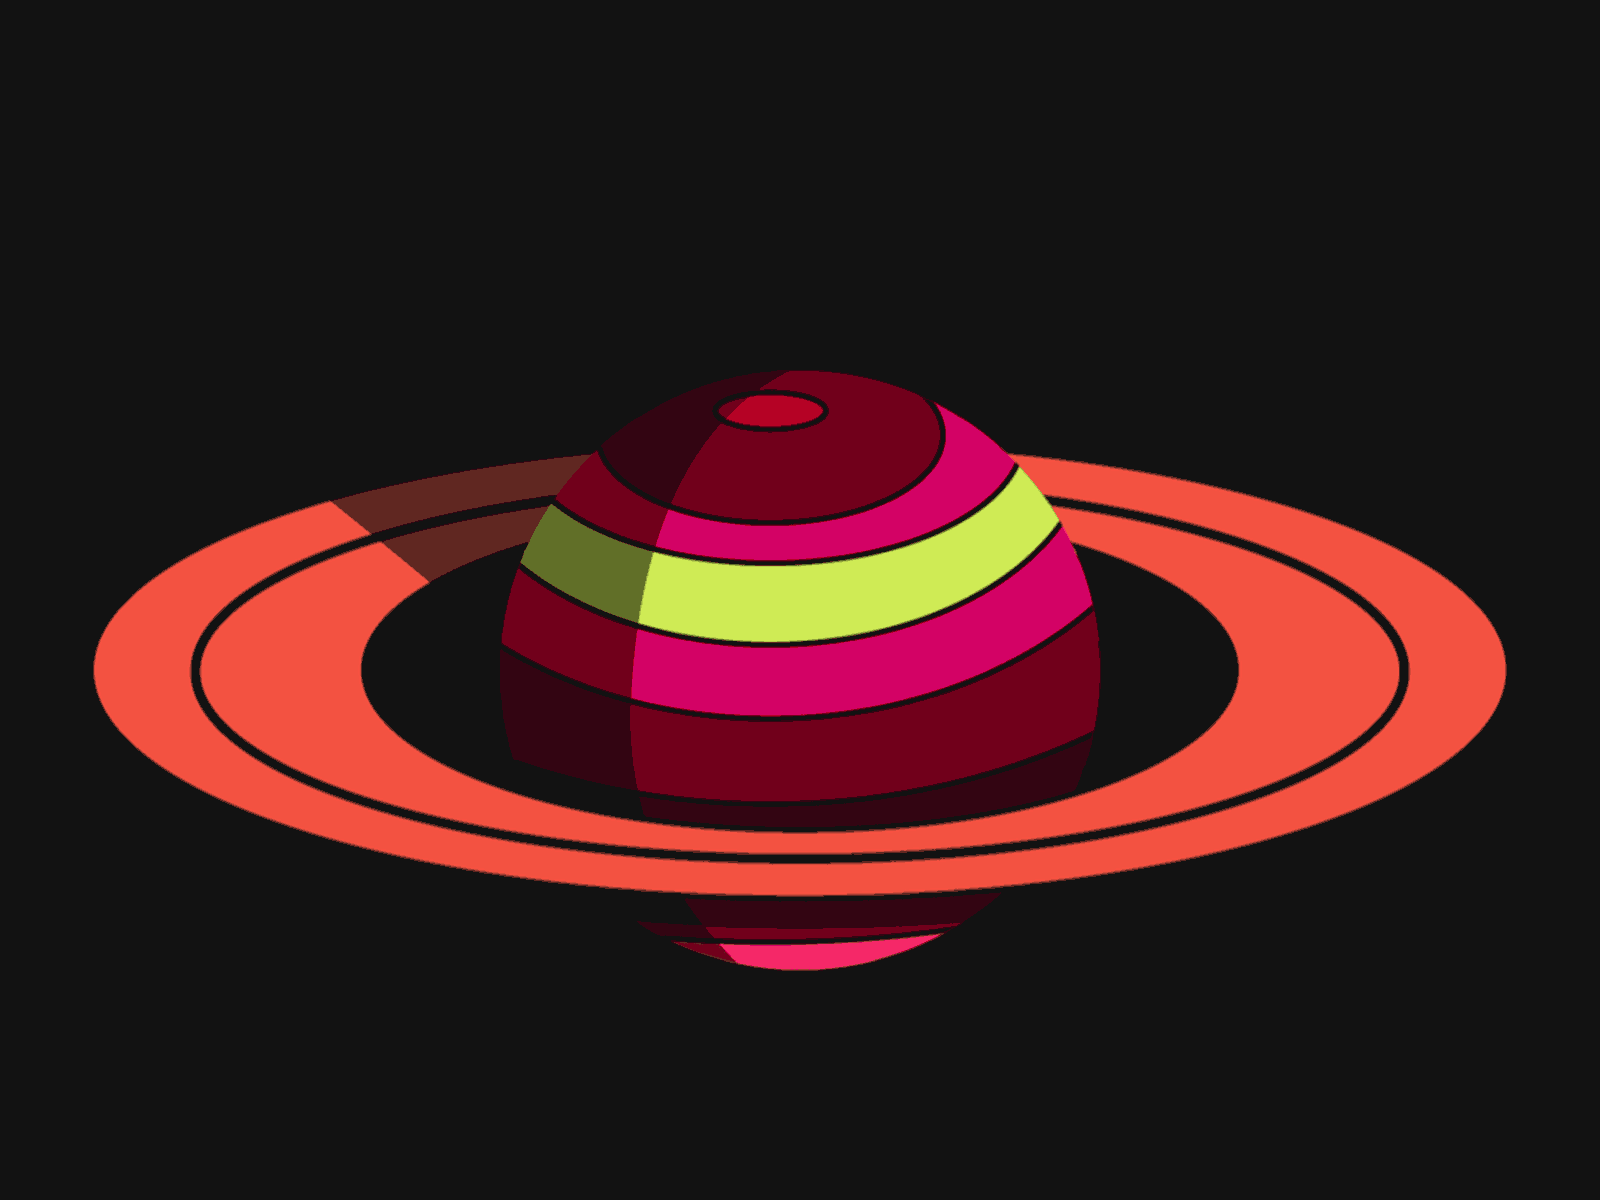 Floating Saturn 2danimation after effects animation animation design flat design illustraion loop planets